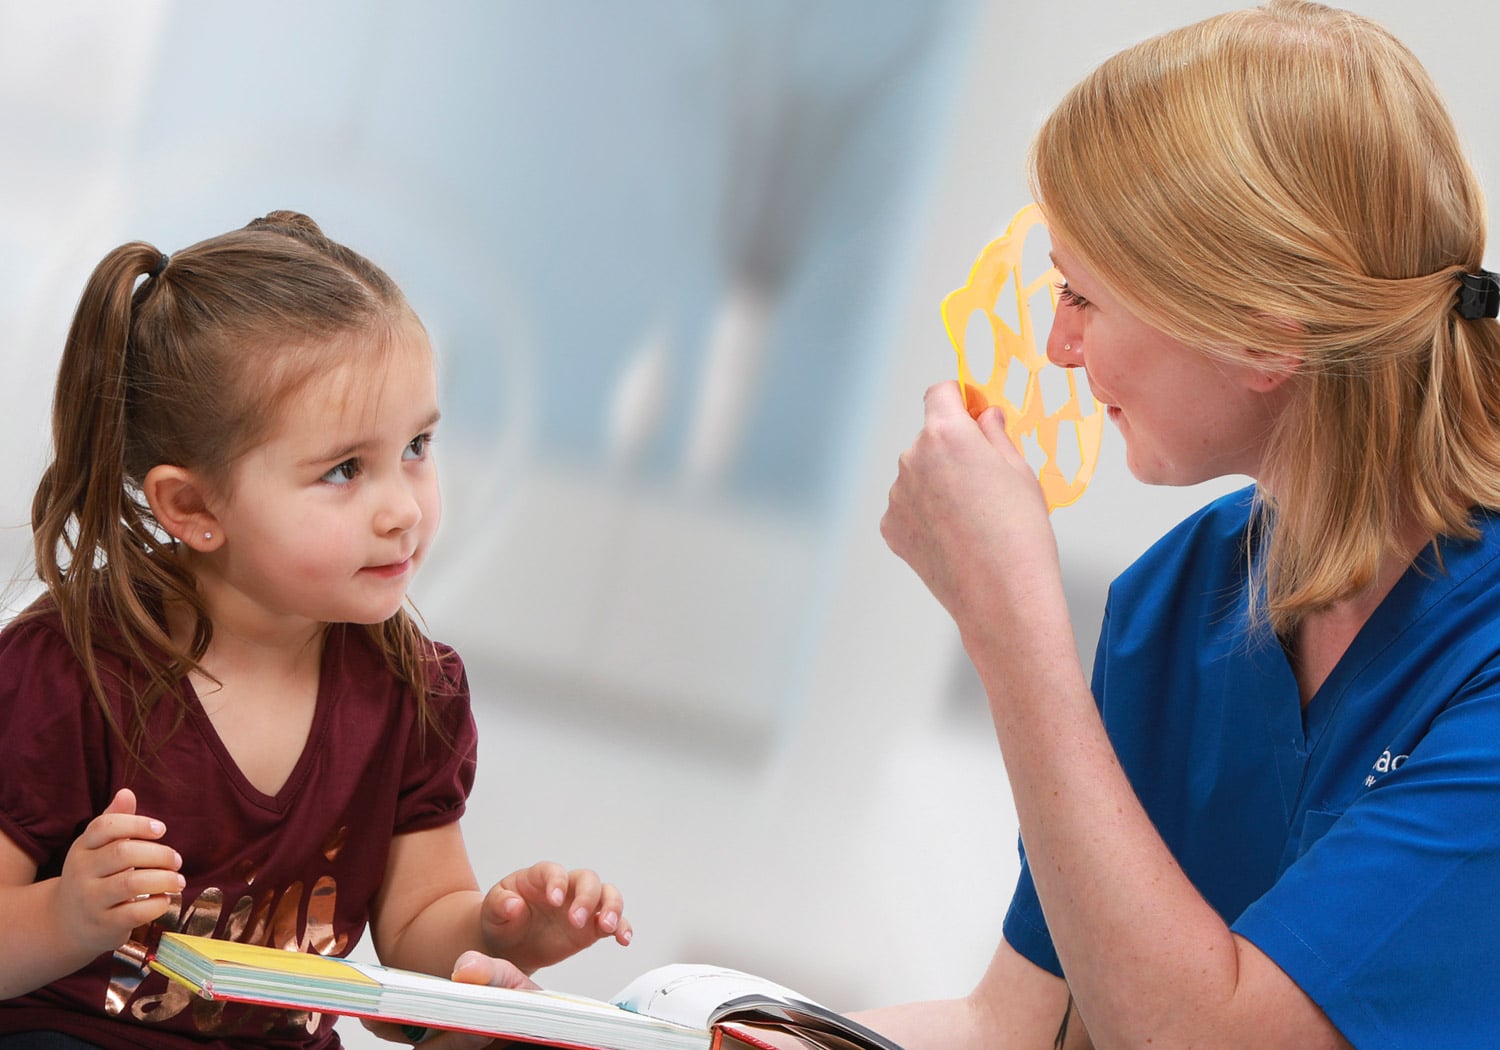 If you or your child’s school or pediatrician have concerns, the first step is to schedule a comprehensive evaluation with a pediatric speech-language pathologist.